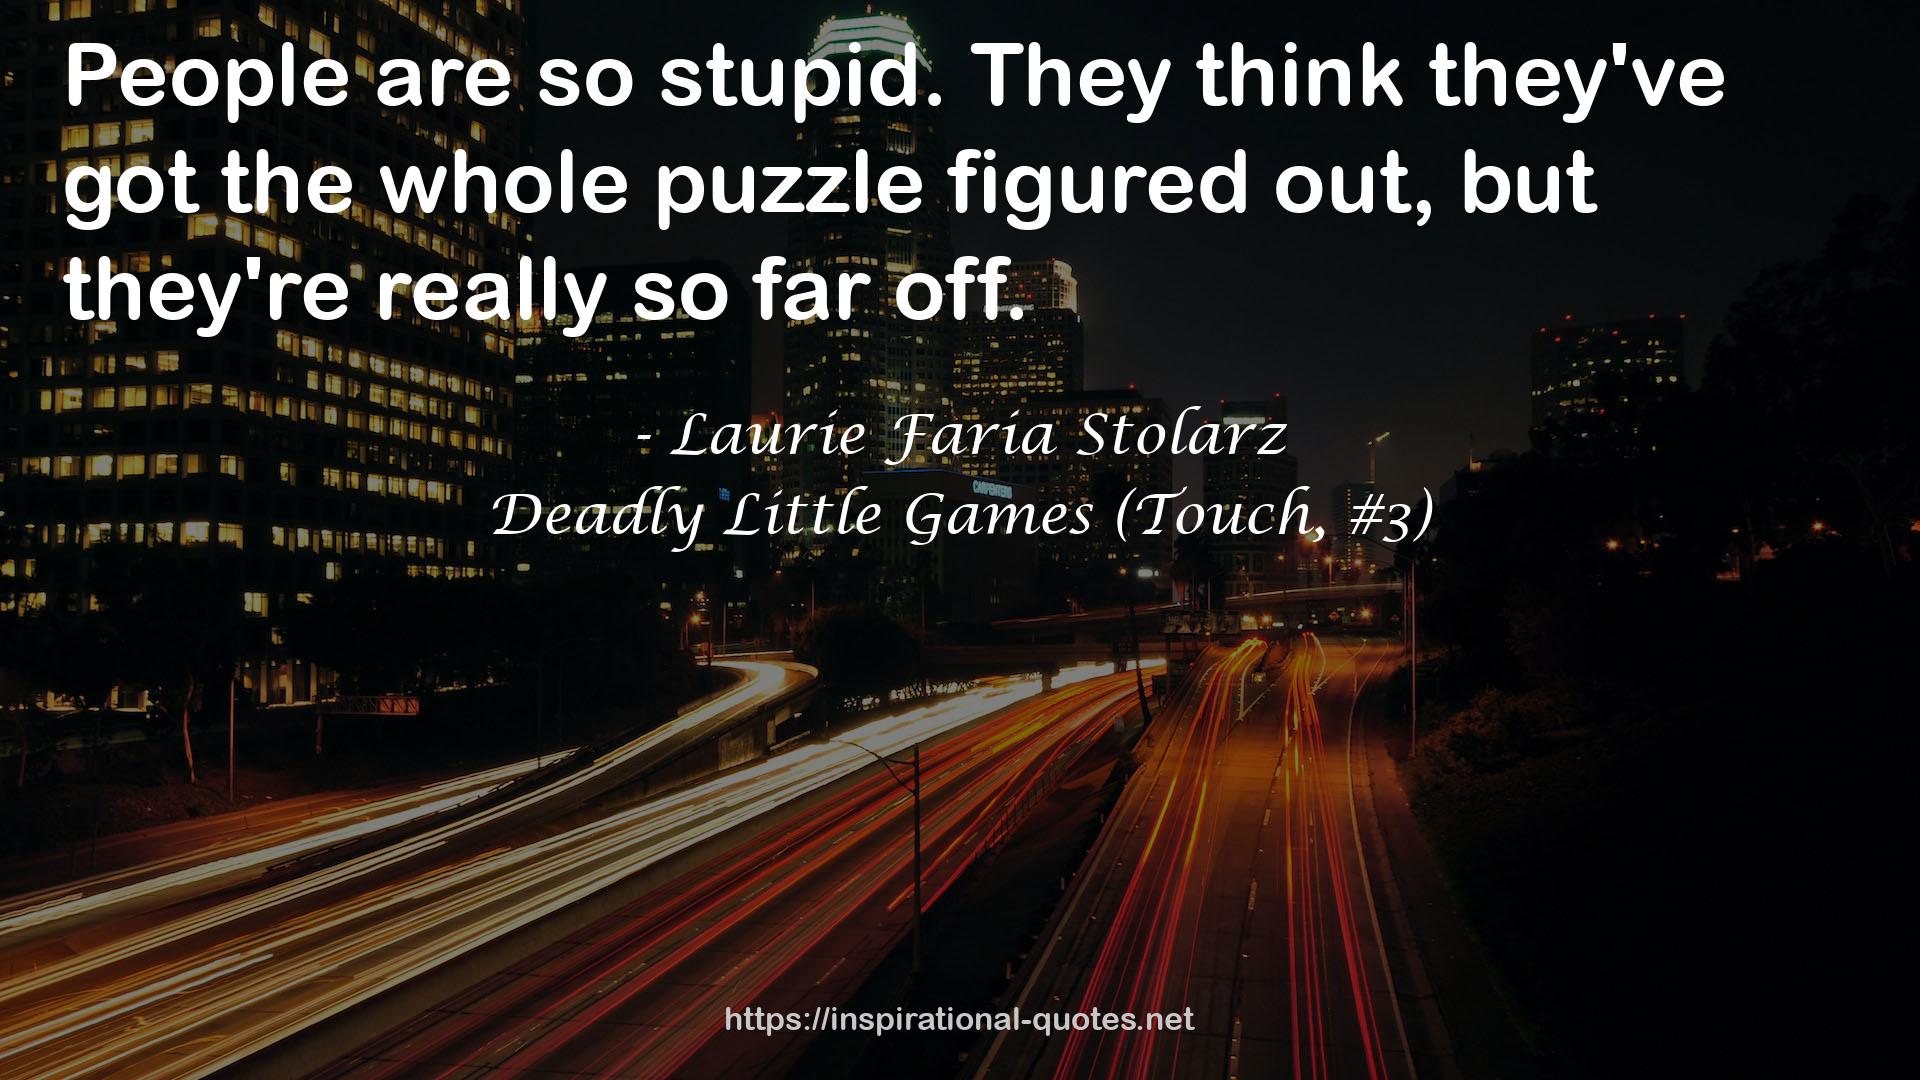 Deadly Little Games (Touch, #3) QUOTES